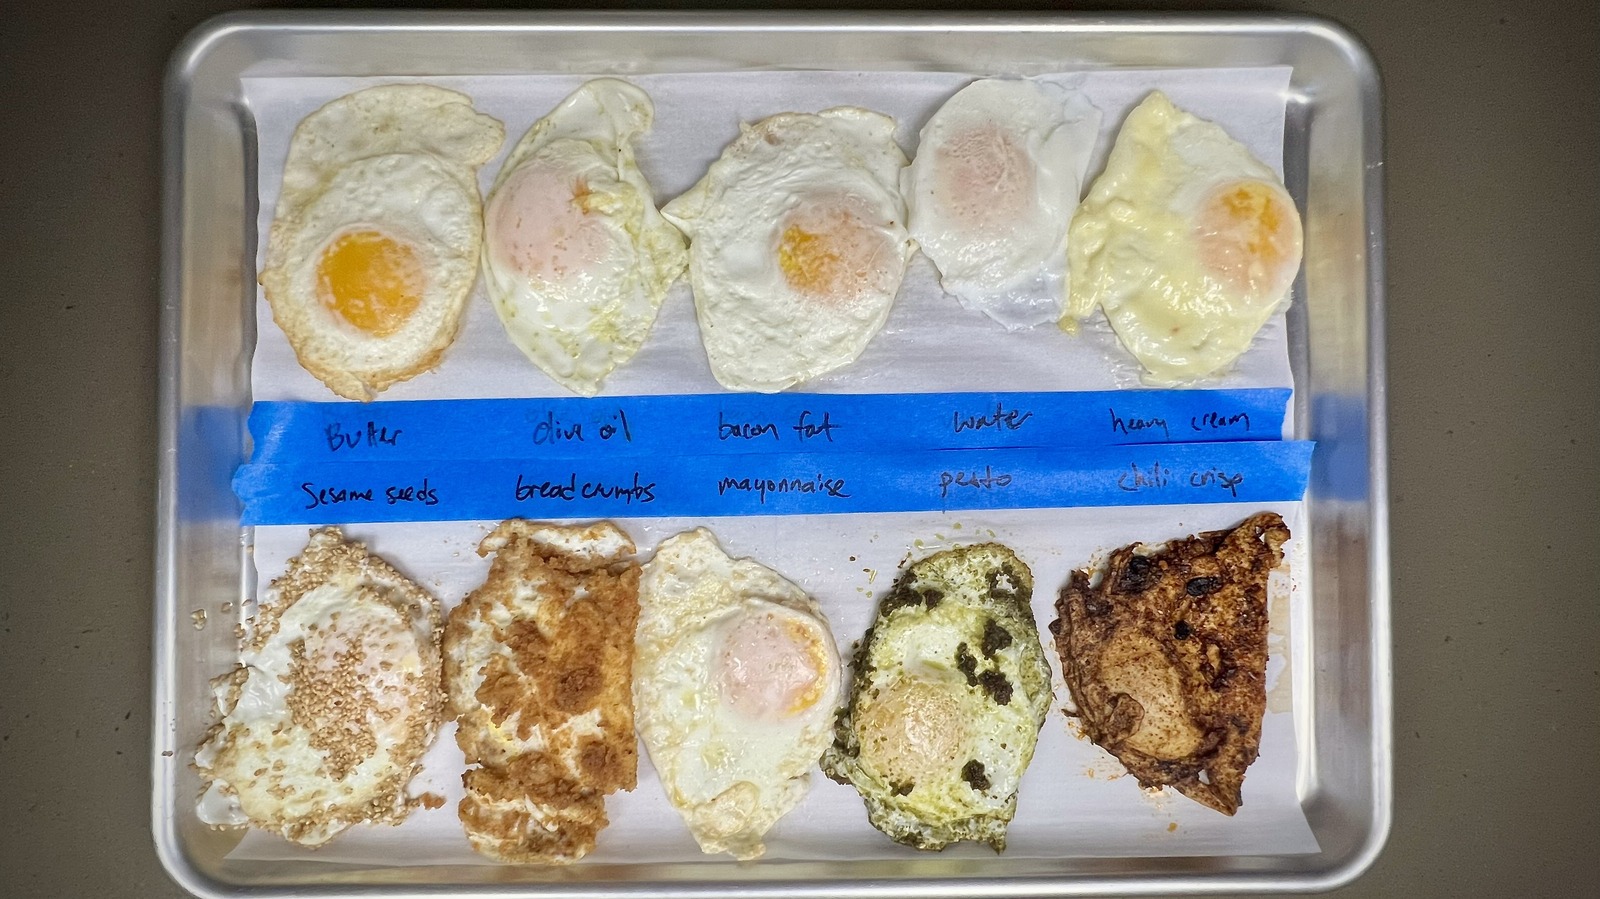 https://www.tastingtable.com/img/gallery/we-tried-10-methods-to-cook-fried-eggs-and-found-the-best-one/l-intro-1684866497.jpg